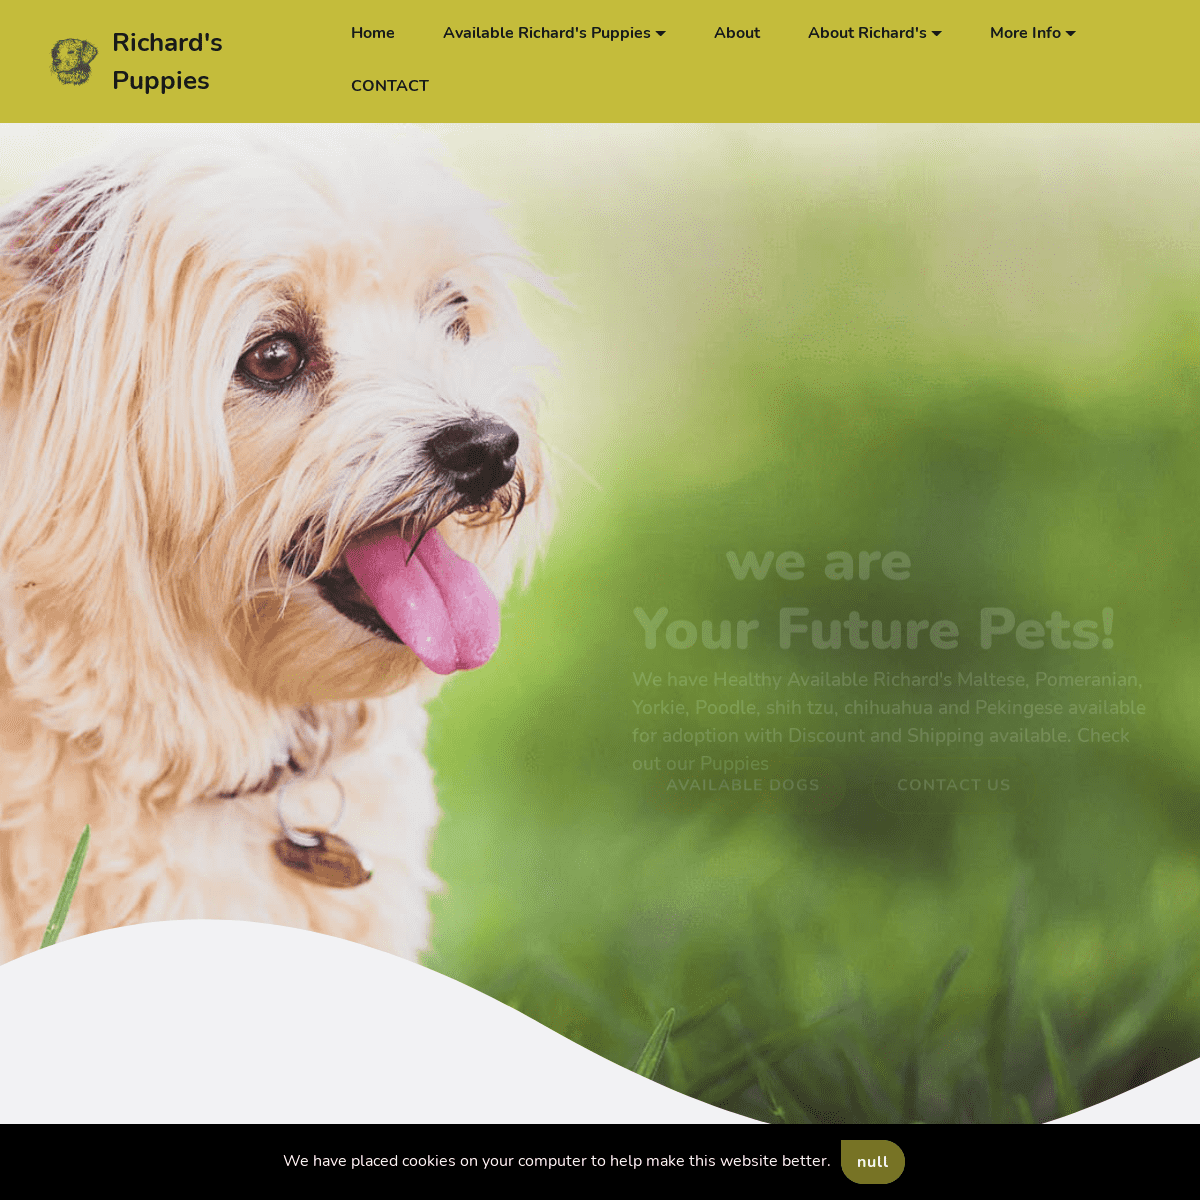 A complete backup of https://puppiesshops.com